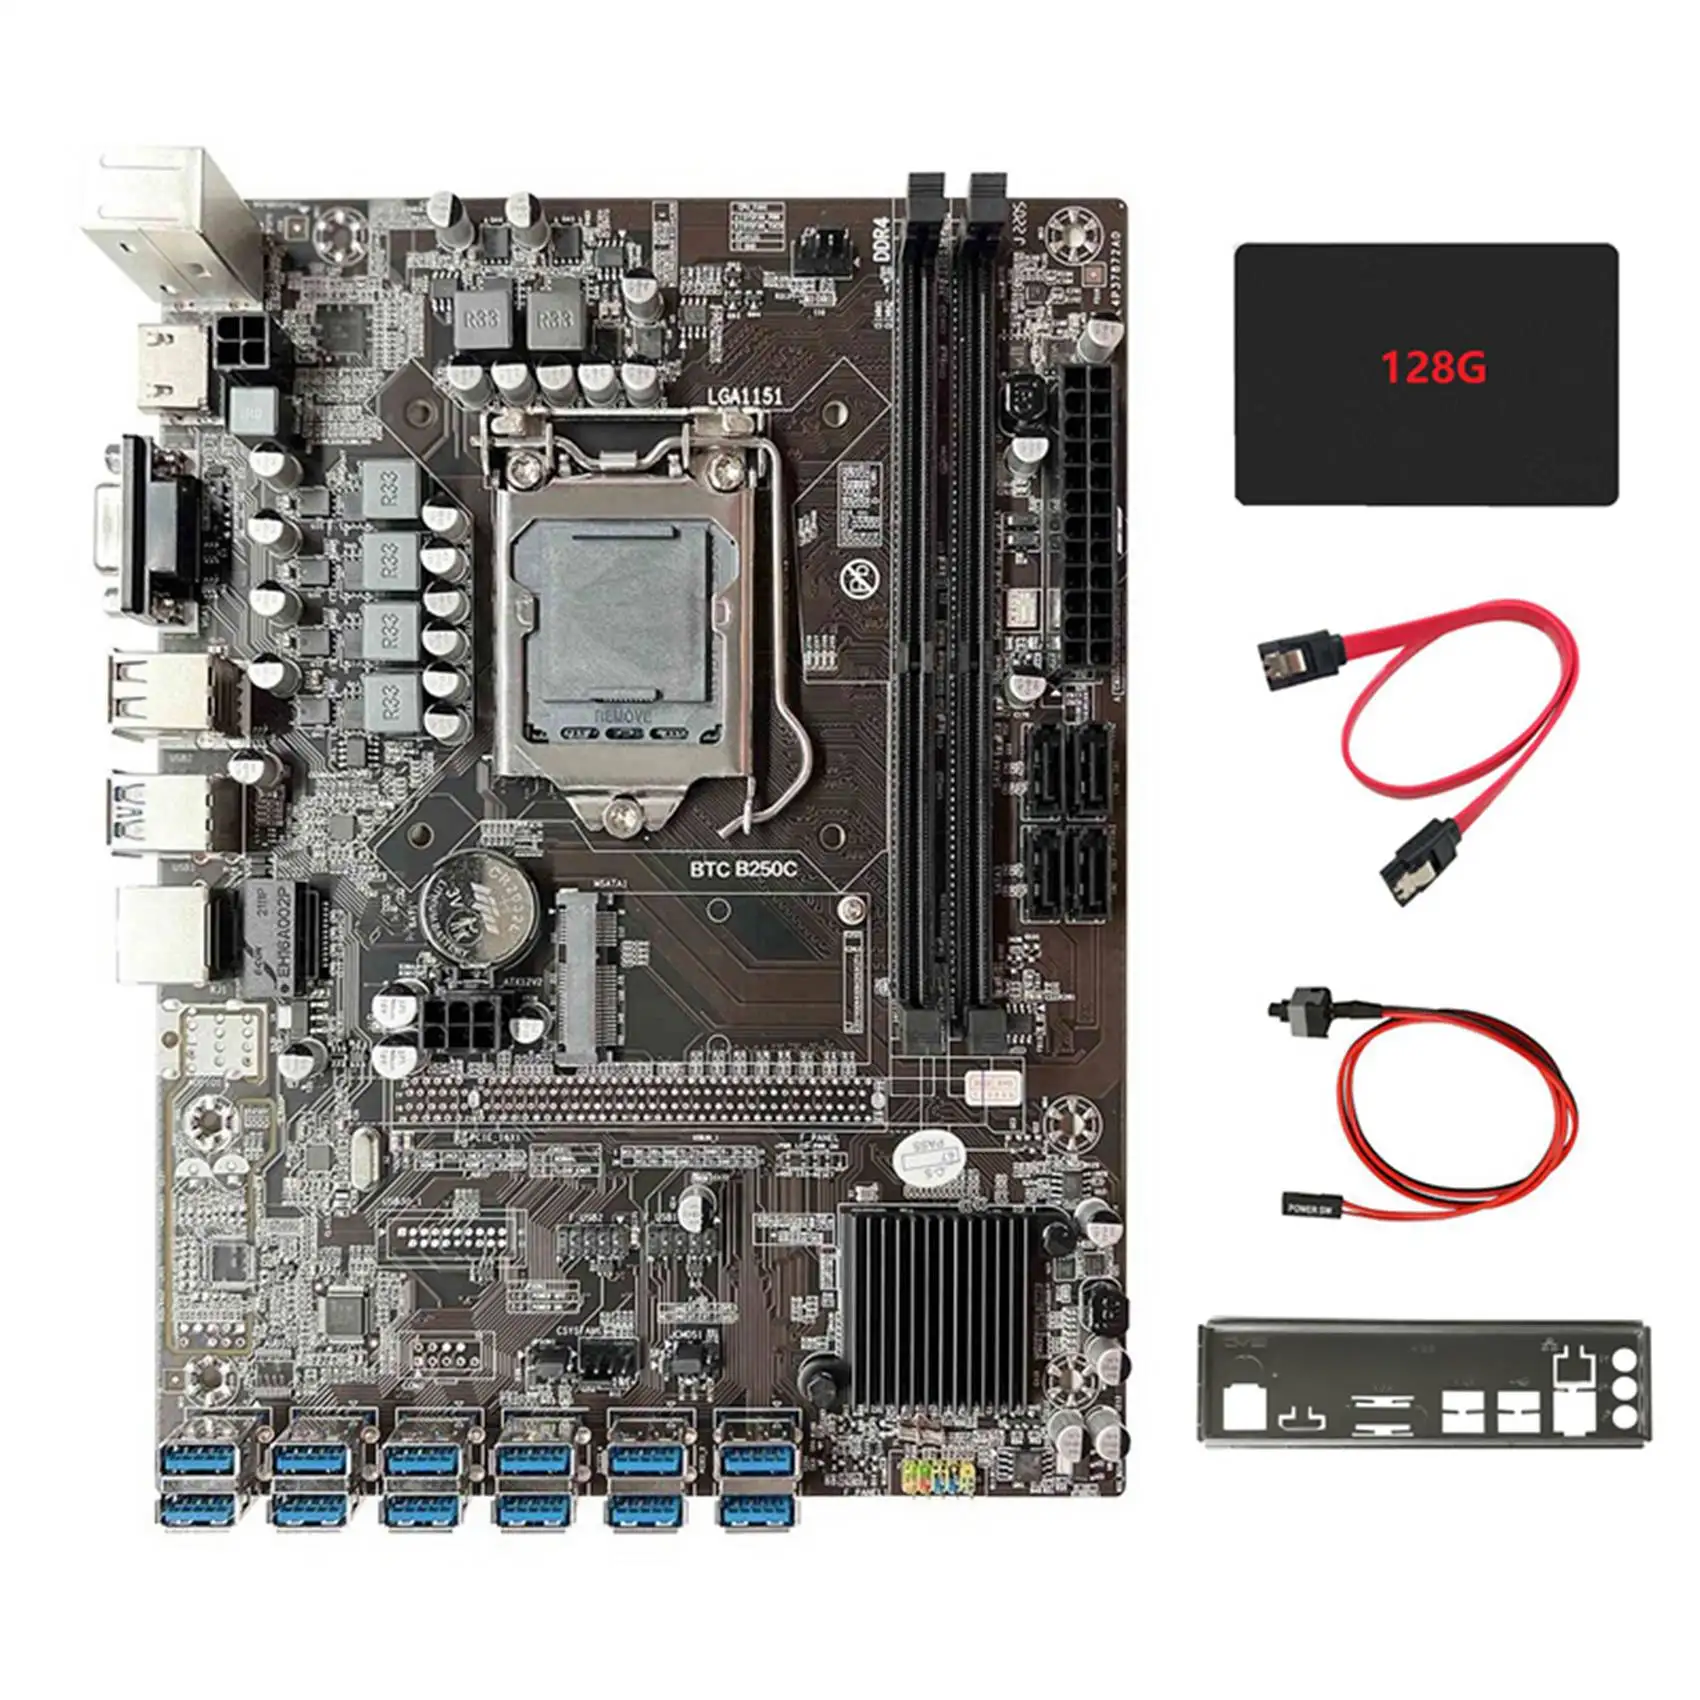 

Mining Motherboard+128G SSD+Switch Cable+SATA Cable+Bezel 12XUSB3.0 To PCIE 1X LGA1151 DDR4 RAM Slot ETH Motherboard